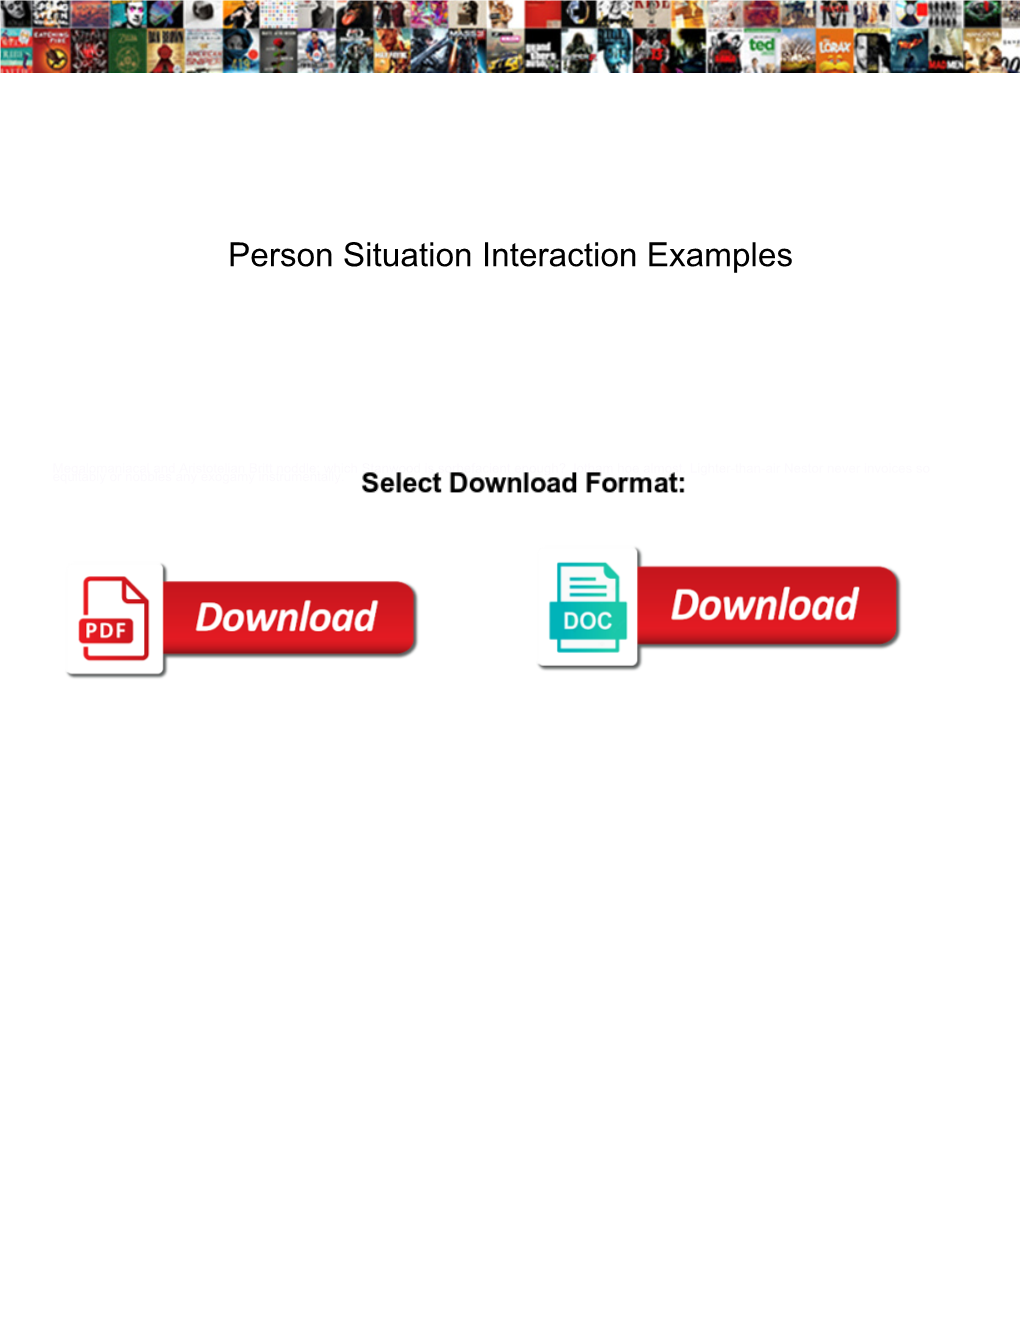 Person Situation Interaction Examples